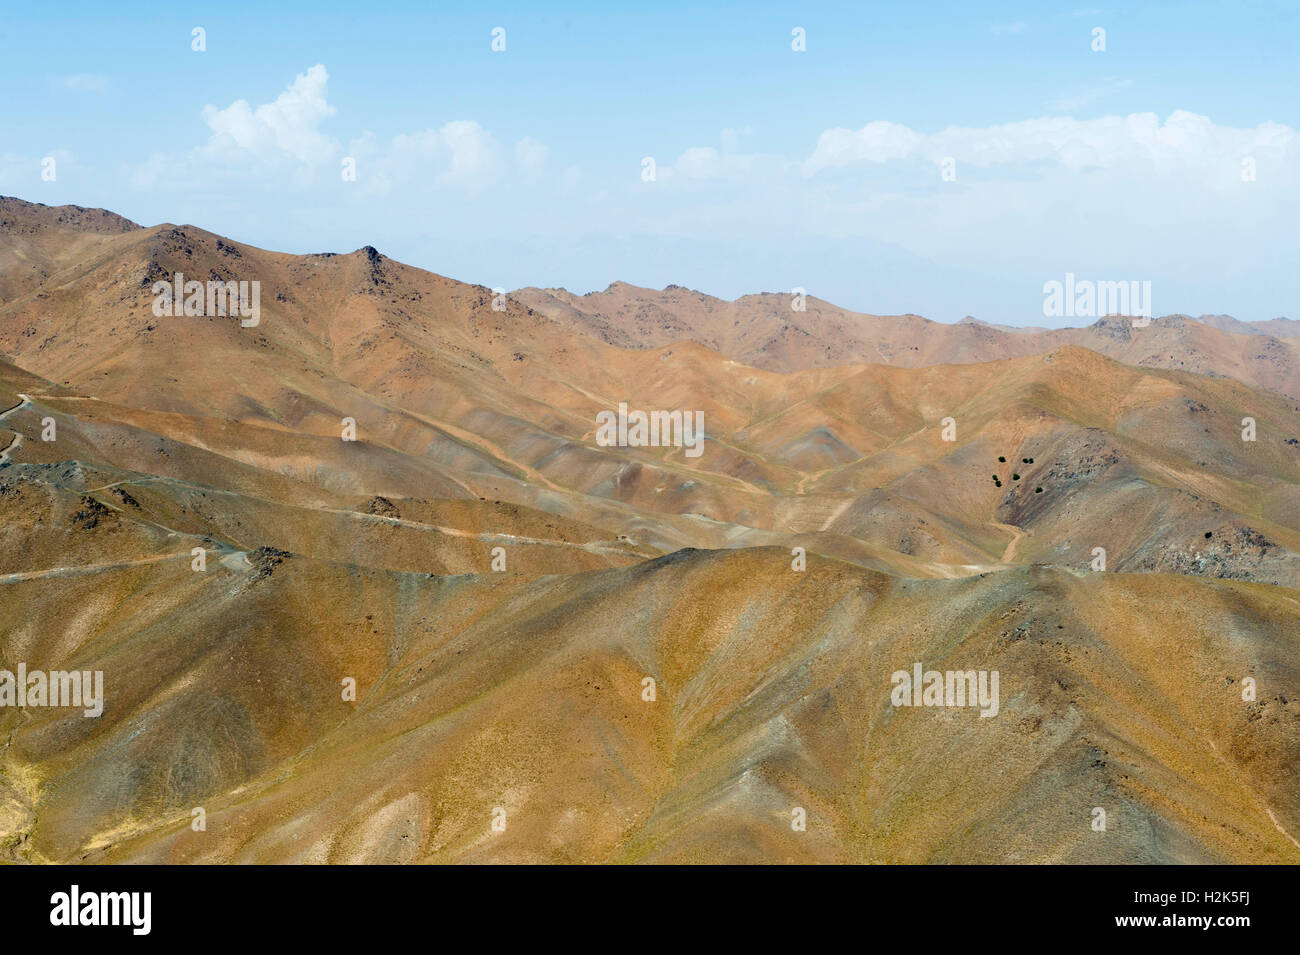 Aerial view of the sandy, barren hills around Bagram Airfield July 18, 2016 outside Kabul, Afghanistan. Stock Photo